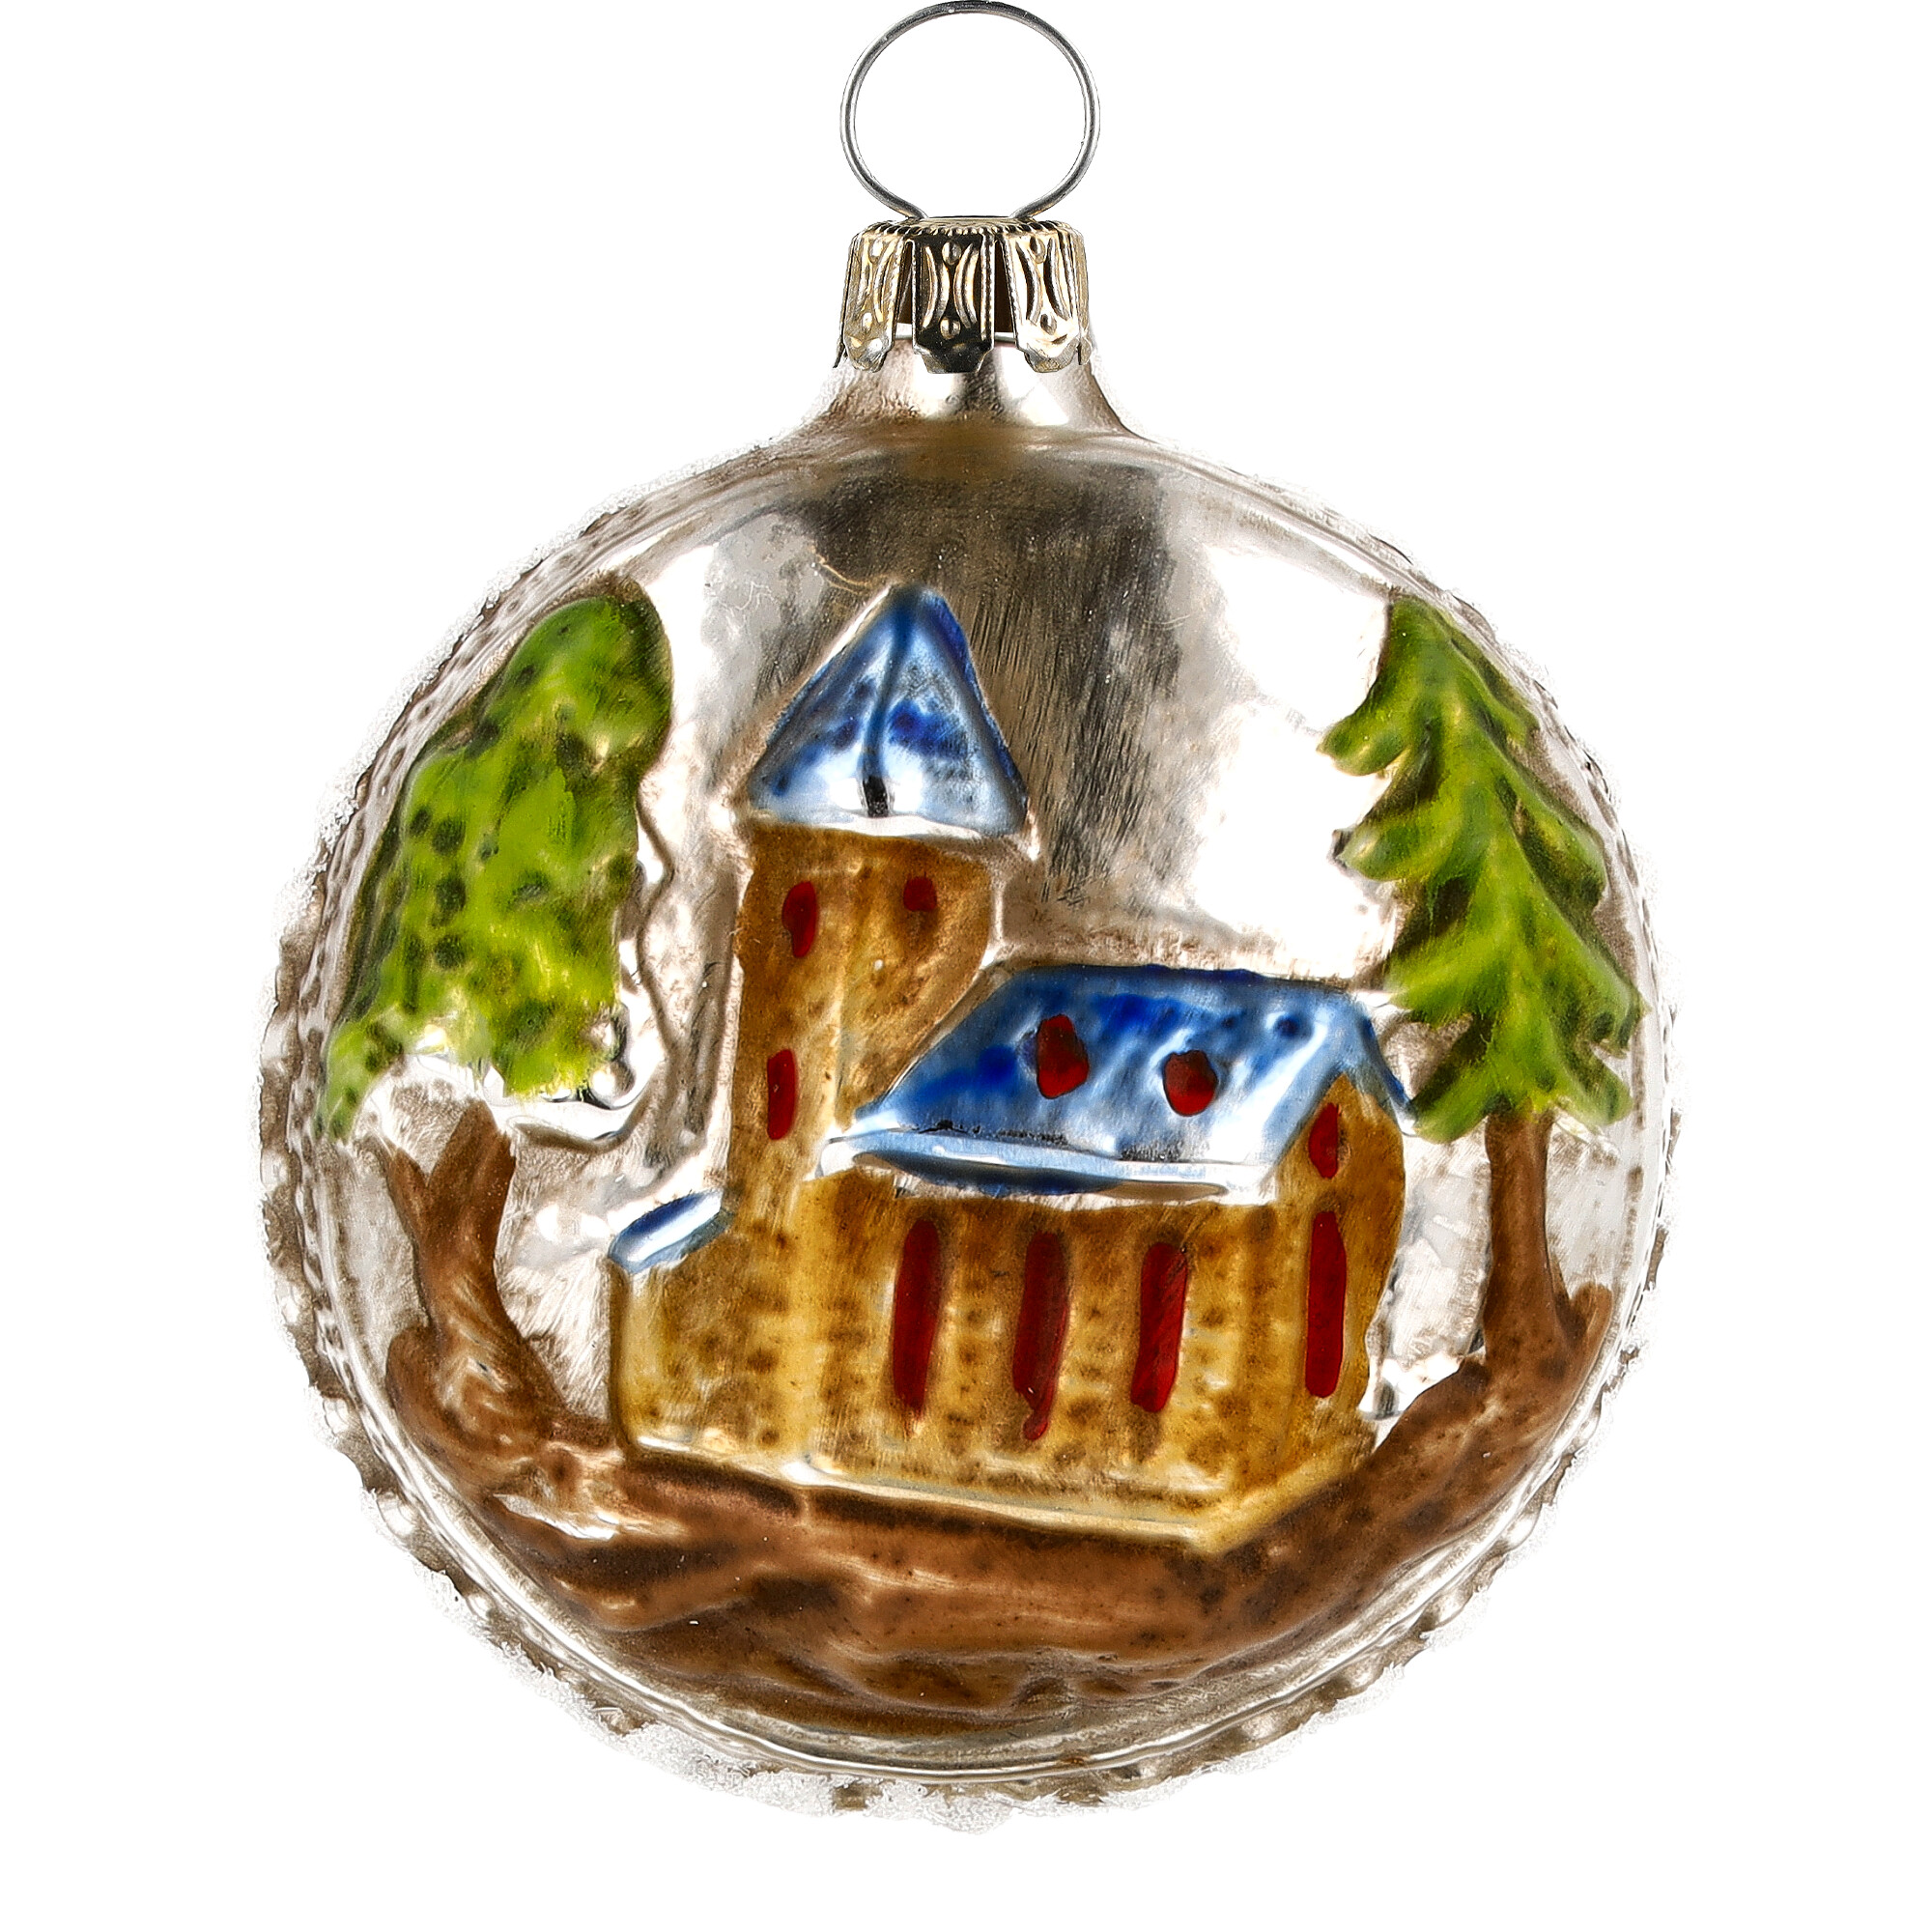 Retro Vintage style Christmas Glass Ornament - Ball with church and tree